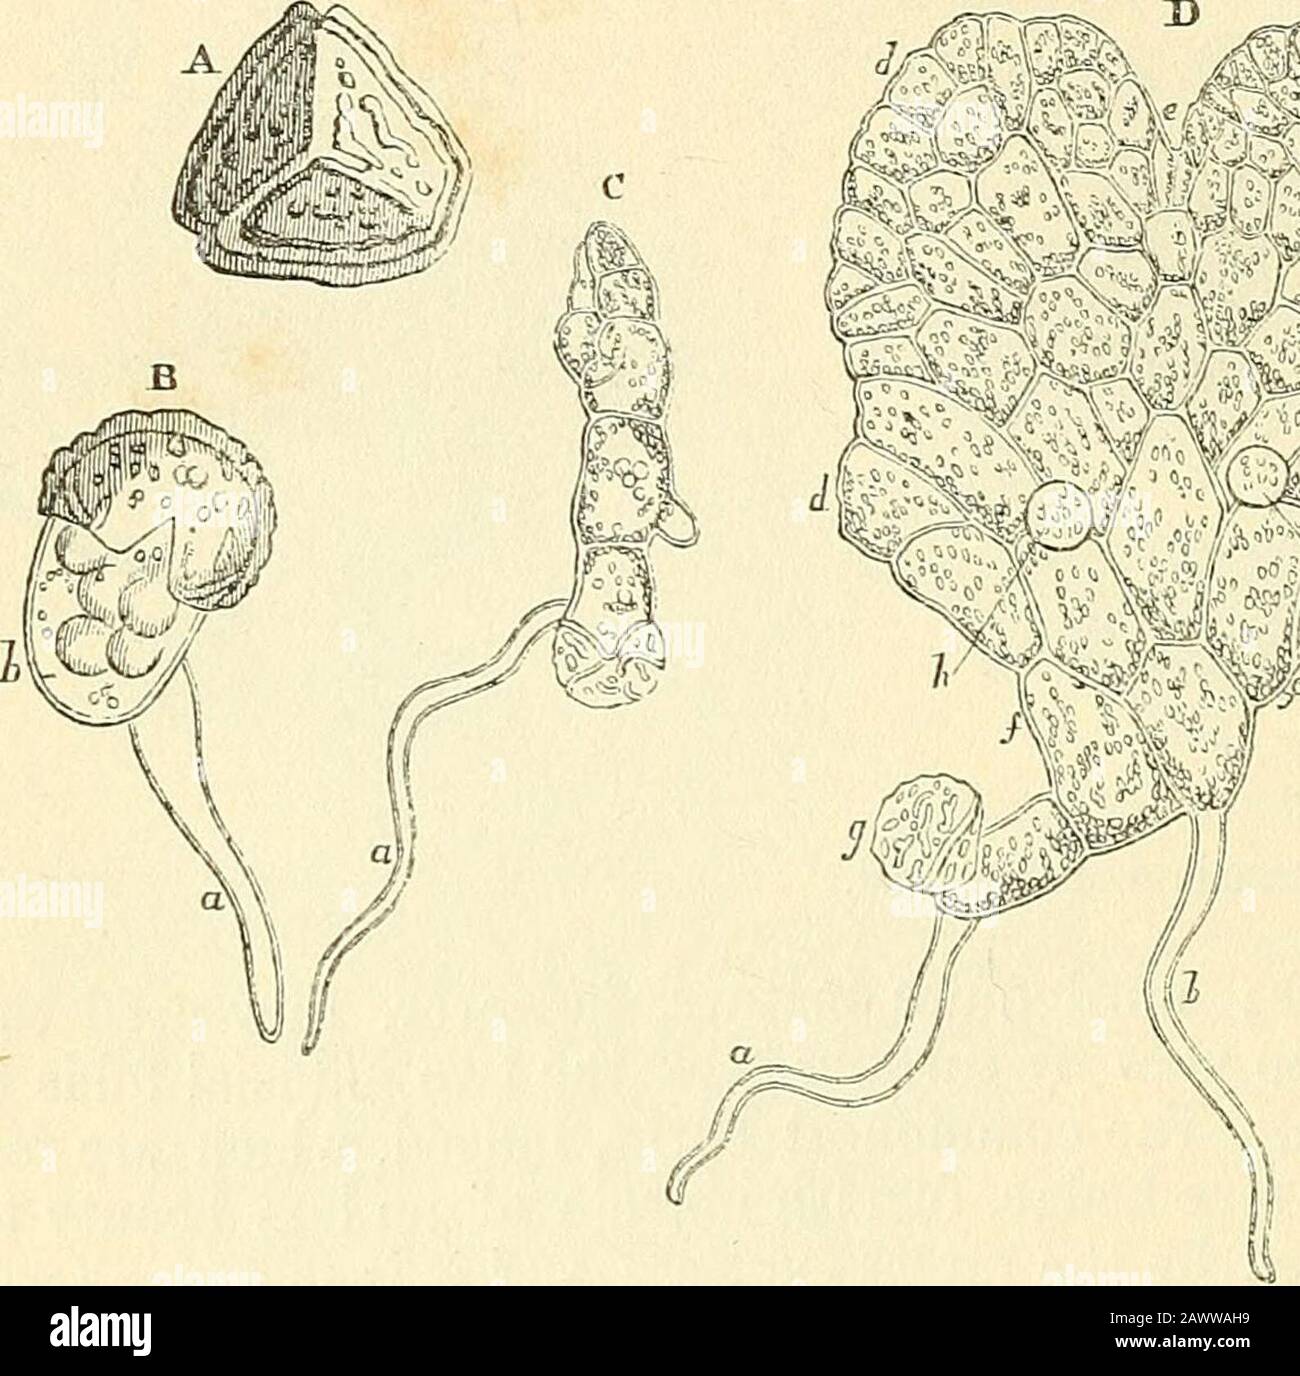 The microscope and its revelations . ismarked, very much in the manner of poUen-grains (Fig. 187),with points, streaks, ridges, or reticulations. When placedupon a damp surface, and exposed to a sufficiency of Kght andwarmth, the spore begias to germinate, the first iaclicationof its vegetative activity being a slight enlargement, which ismanifested in the rounding-off of its angles; this is followedby the putting-forth of a tubular prolongation (b, a) of theiaternal ceU-waU, through an aperture in the outer spore-coat ; and, by the absorption of moisture through this root-fibre, the inner ceU Stock Photo